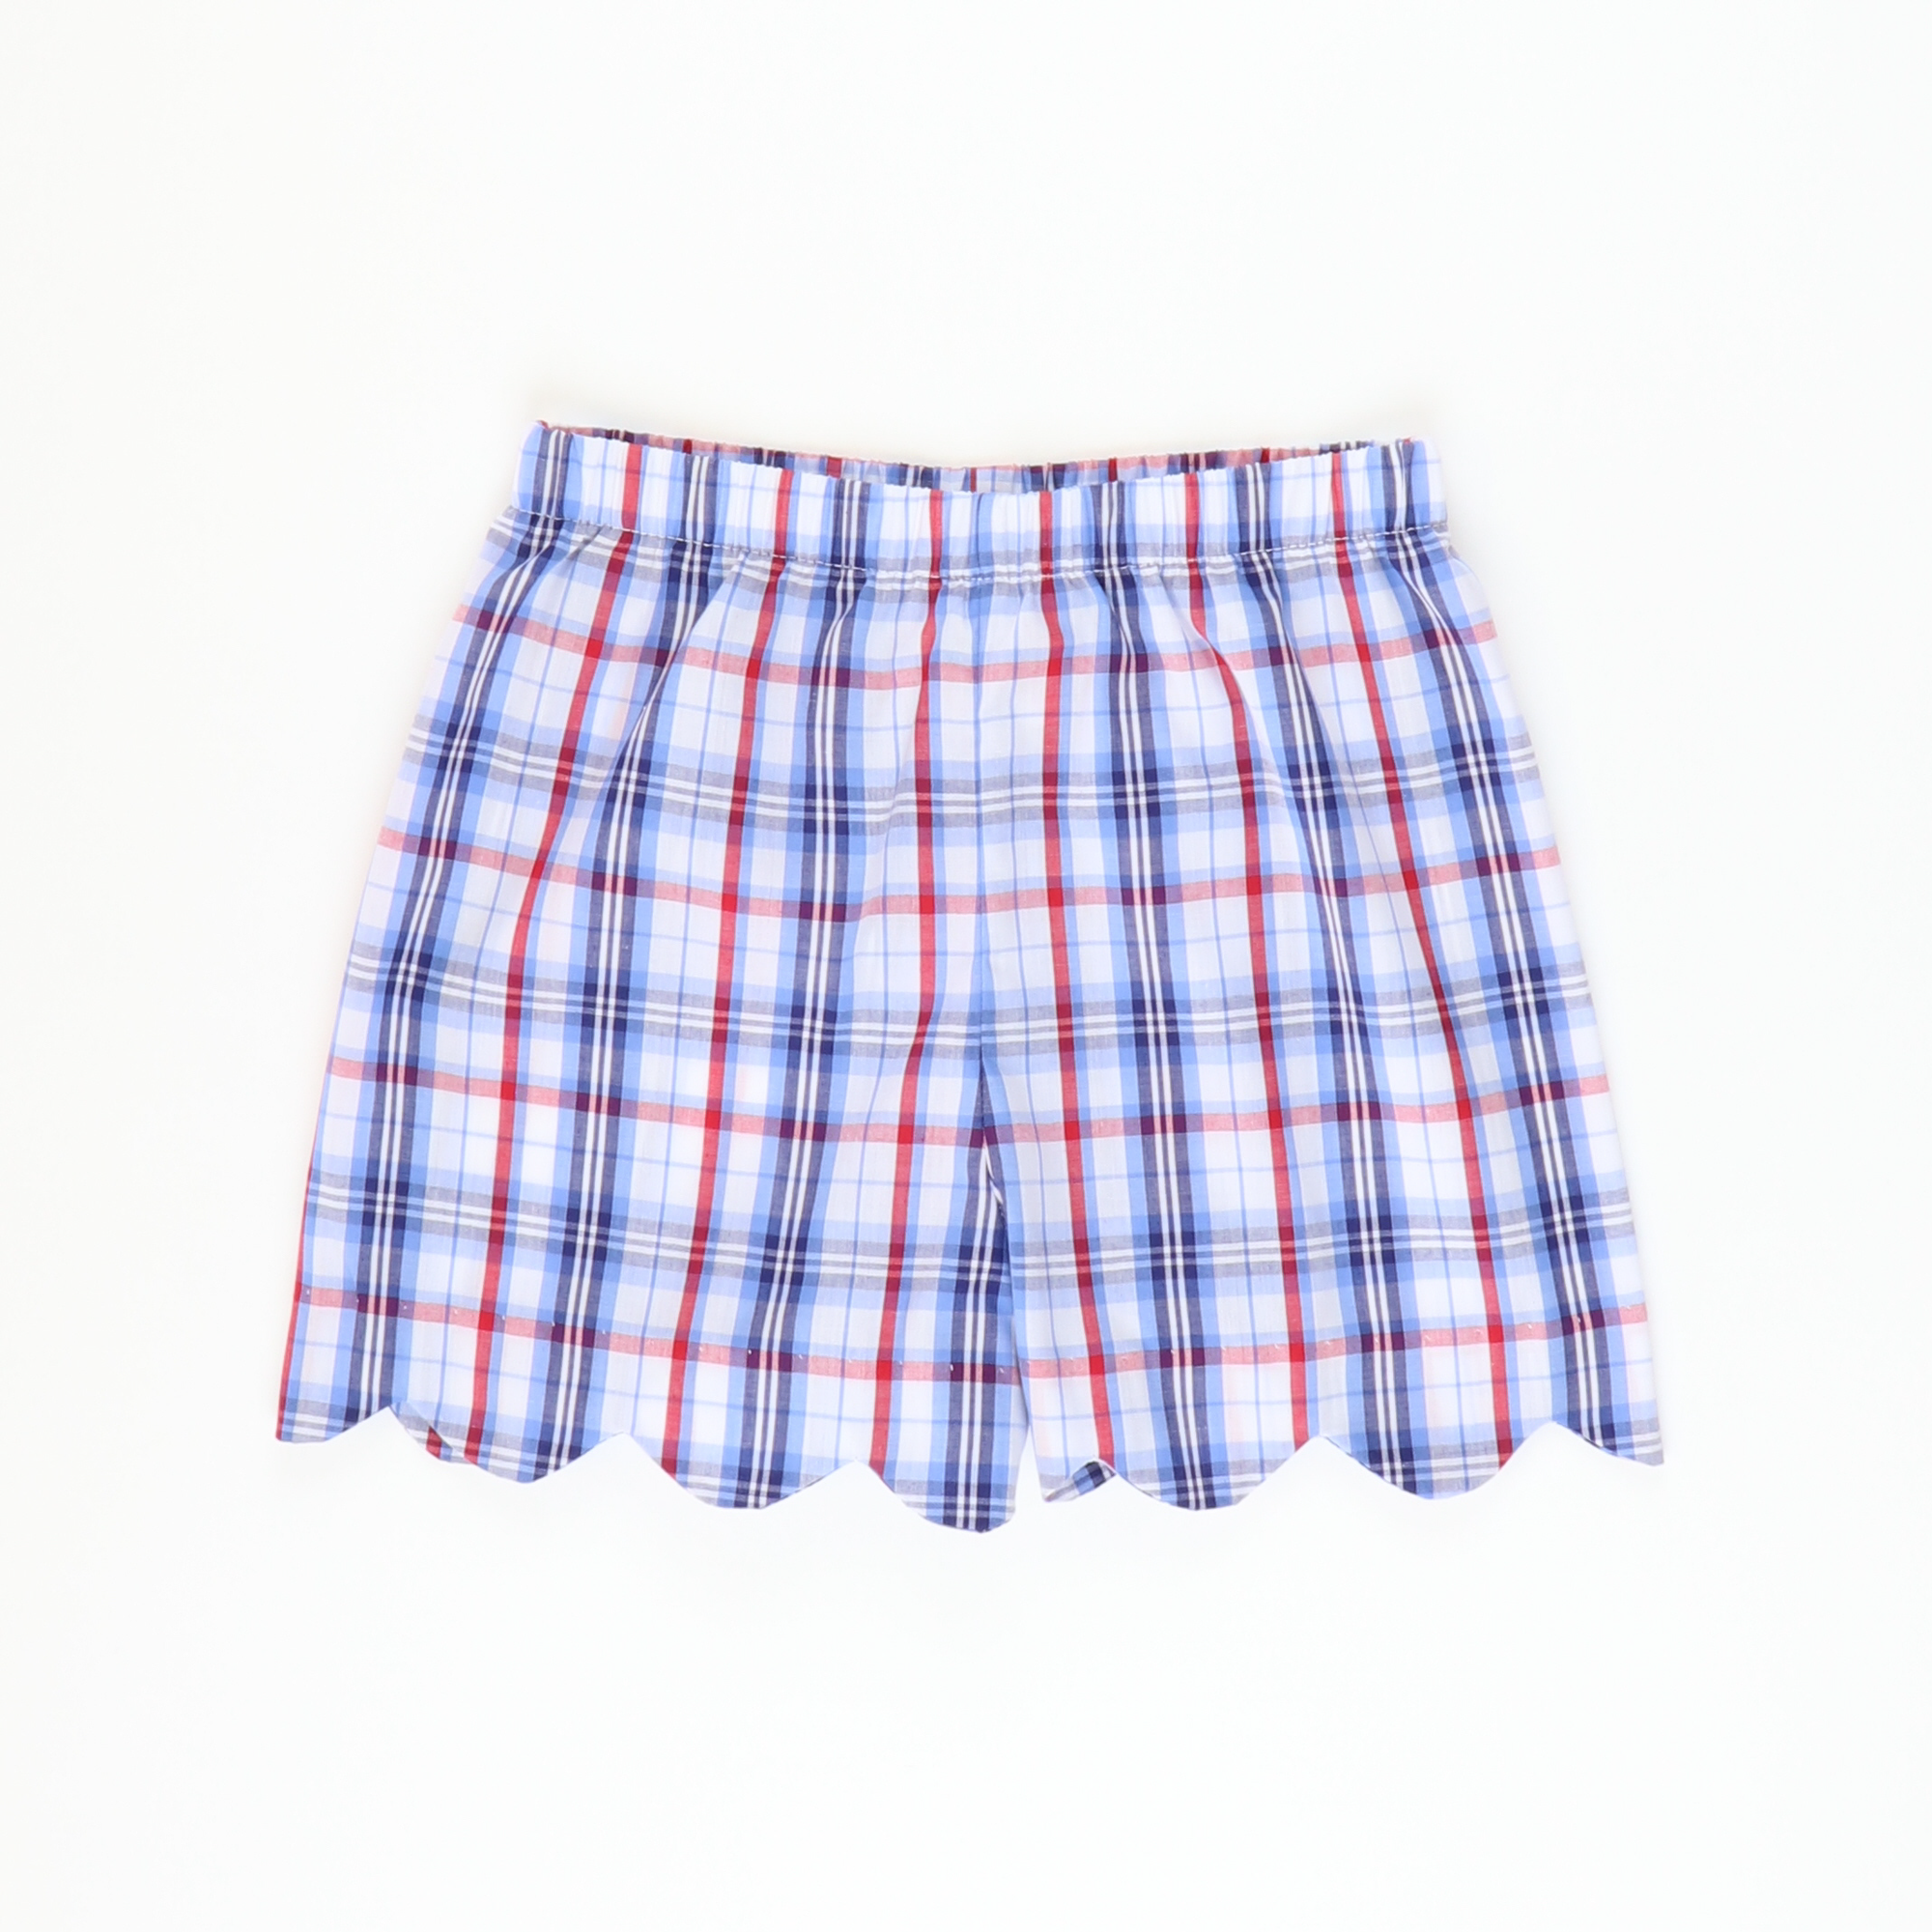 Scalloped Girl Shorts - Liberty Plaid - Stellybelly